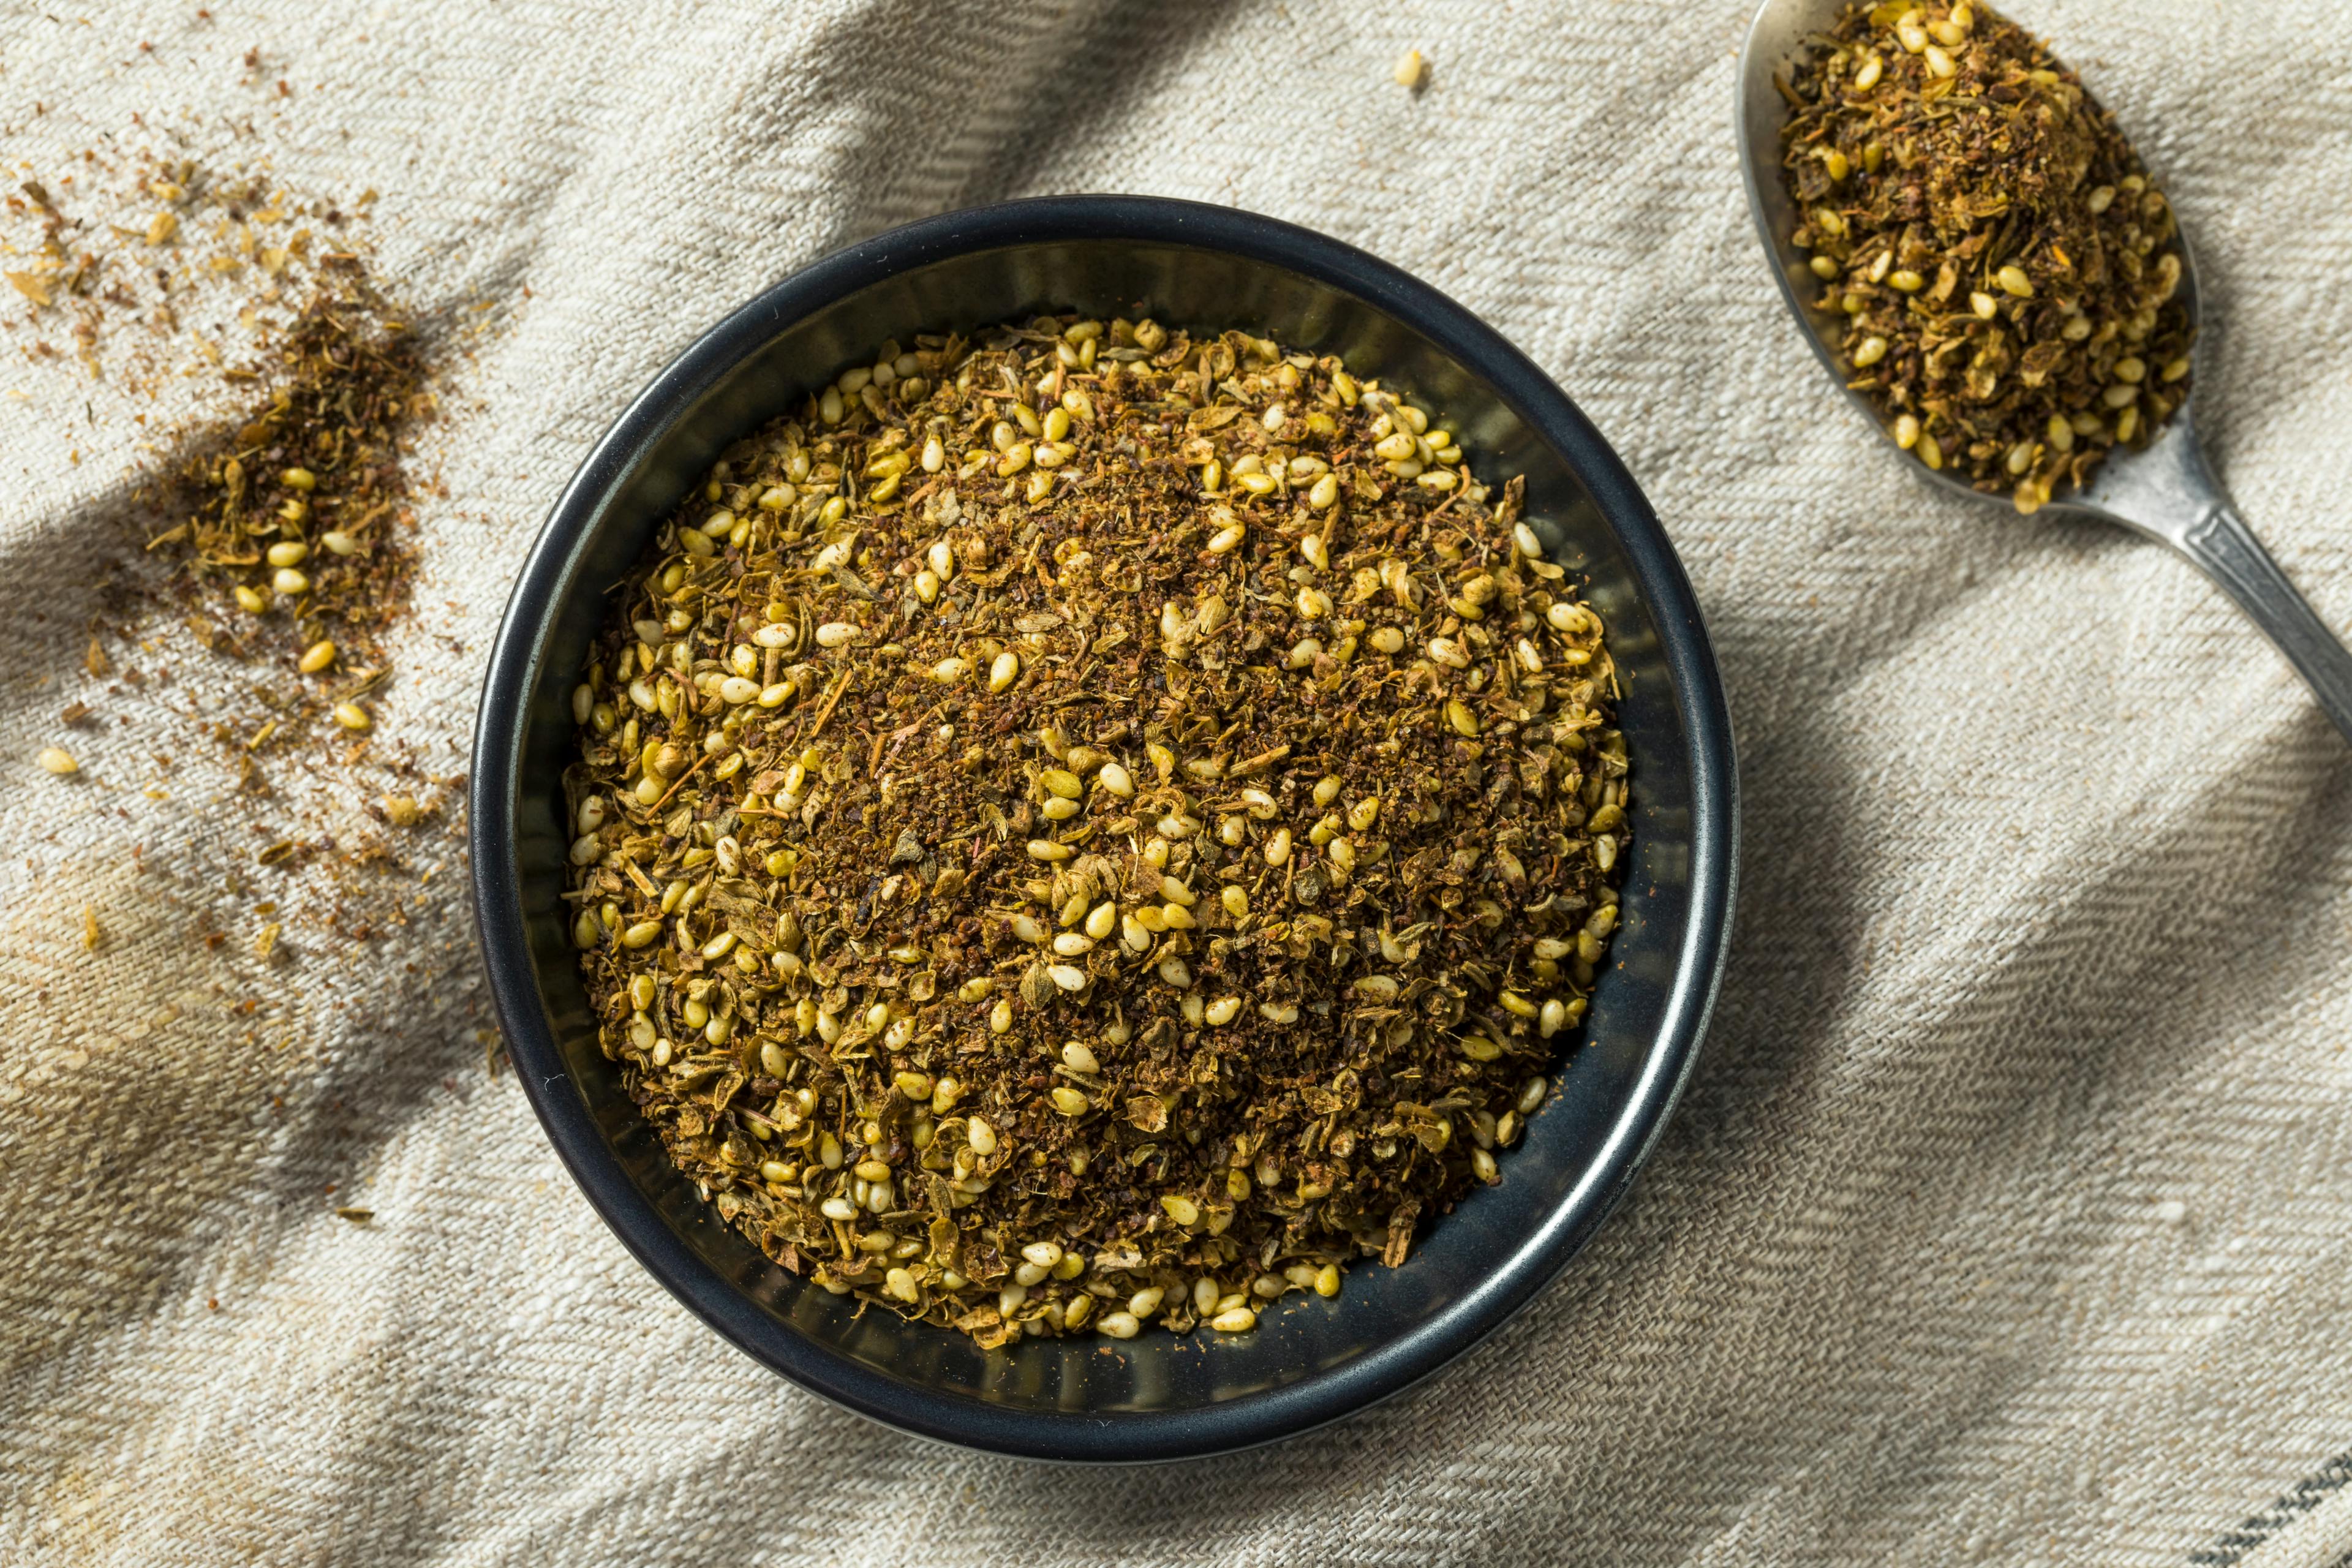 A flavorful homemade version of the traditional Middle Eastern spice blend zaatar. It's an easy recipe that can add a authentic and aromatic touch to a wide range of dishes.